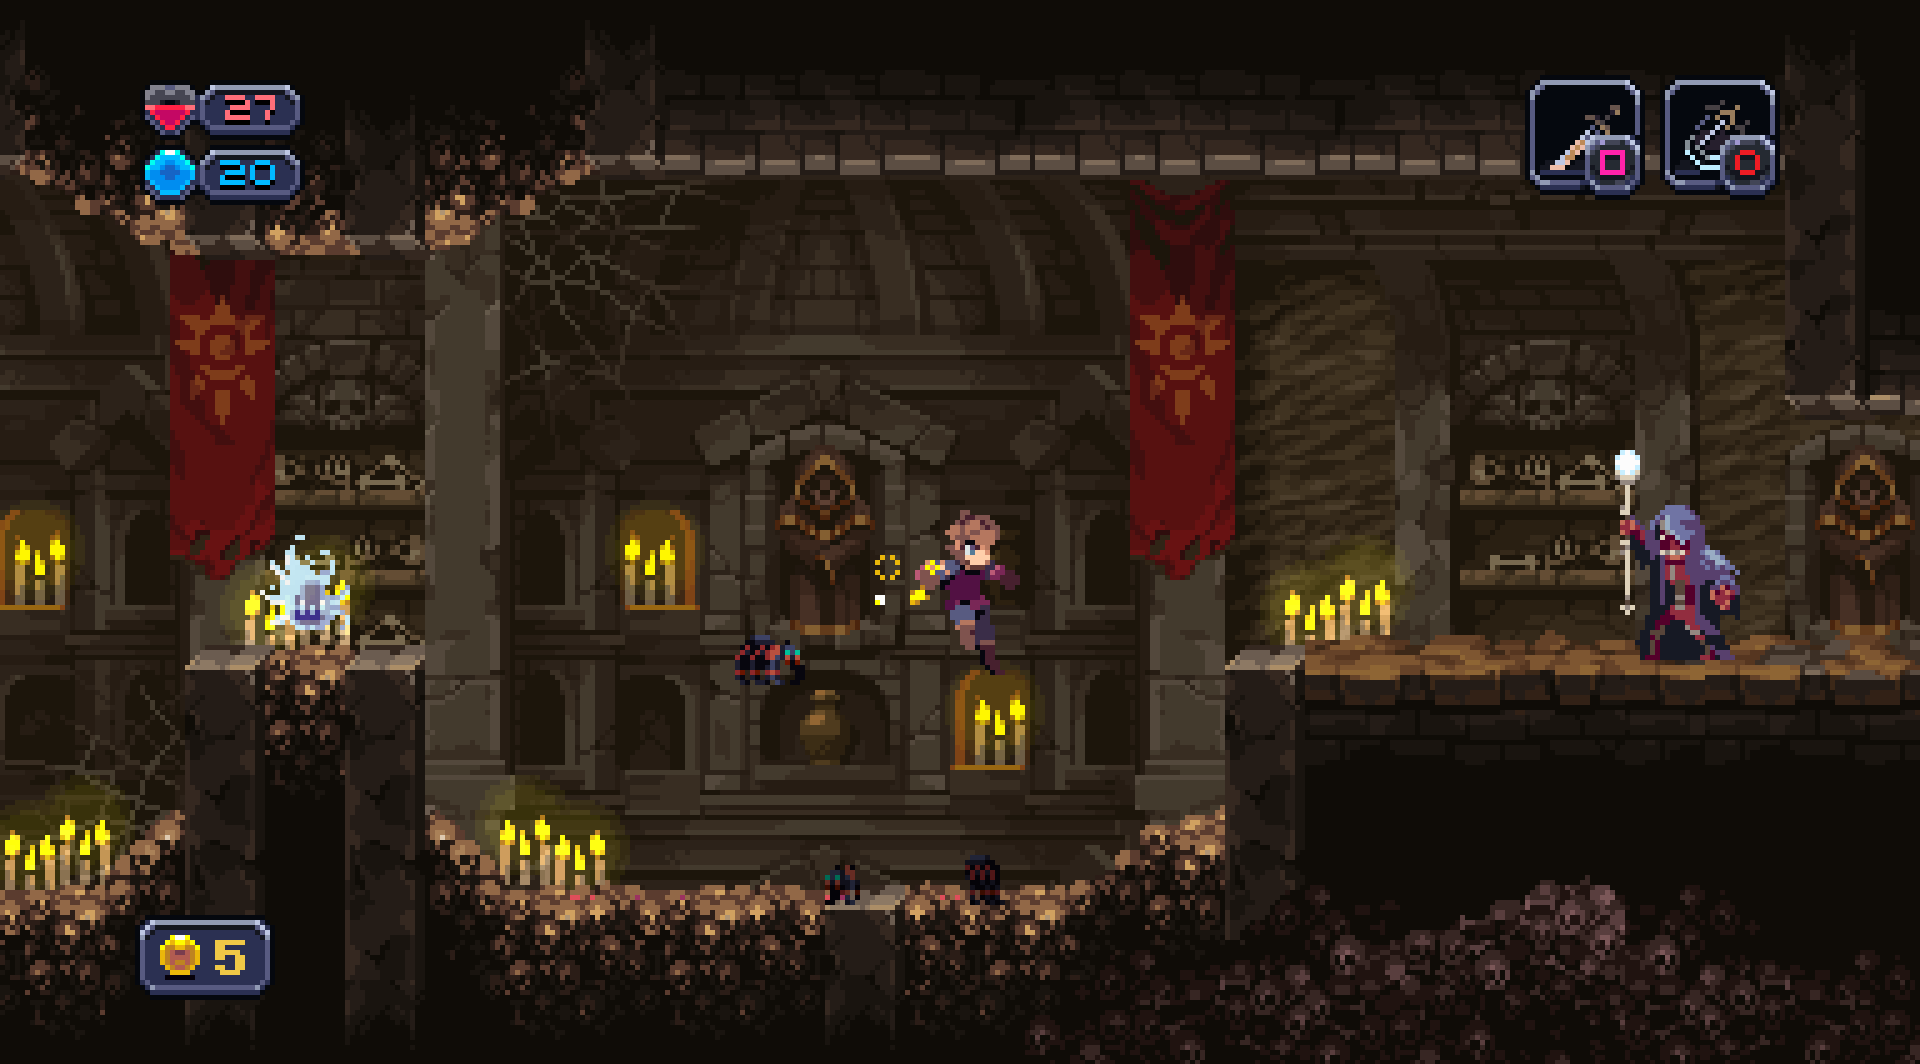 Chasm Looks To Be An Interesting Roguelike Metroidvania Pixel